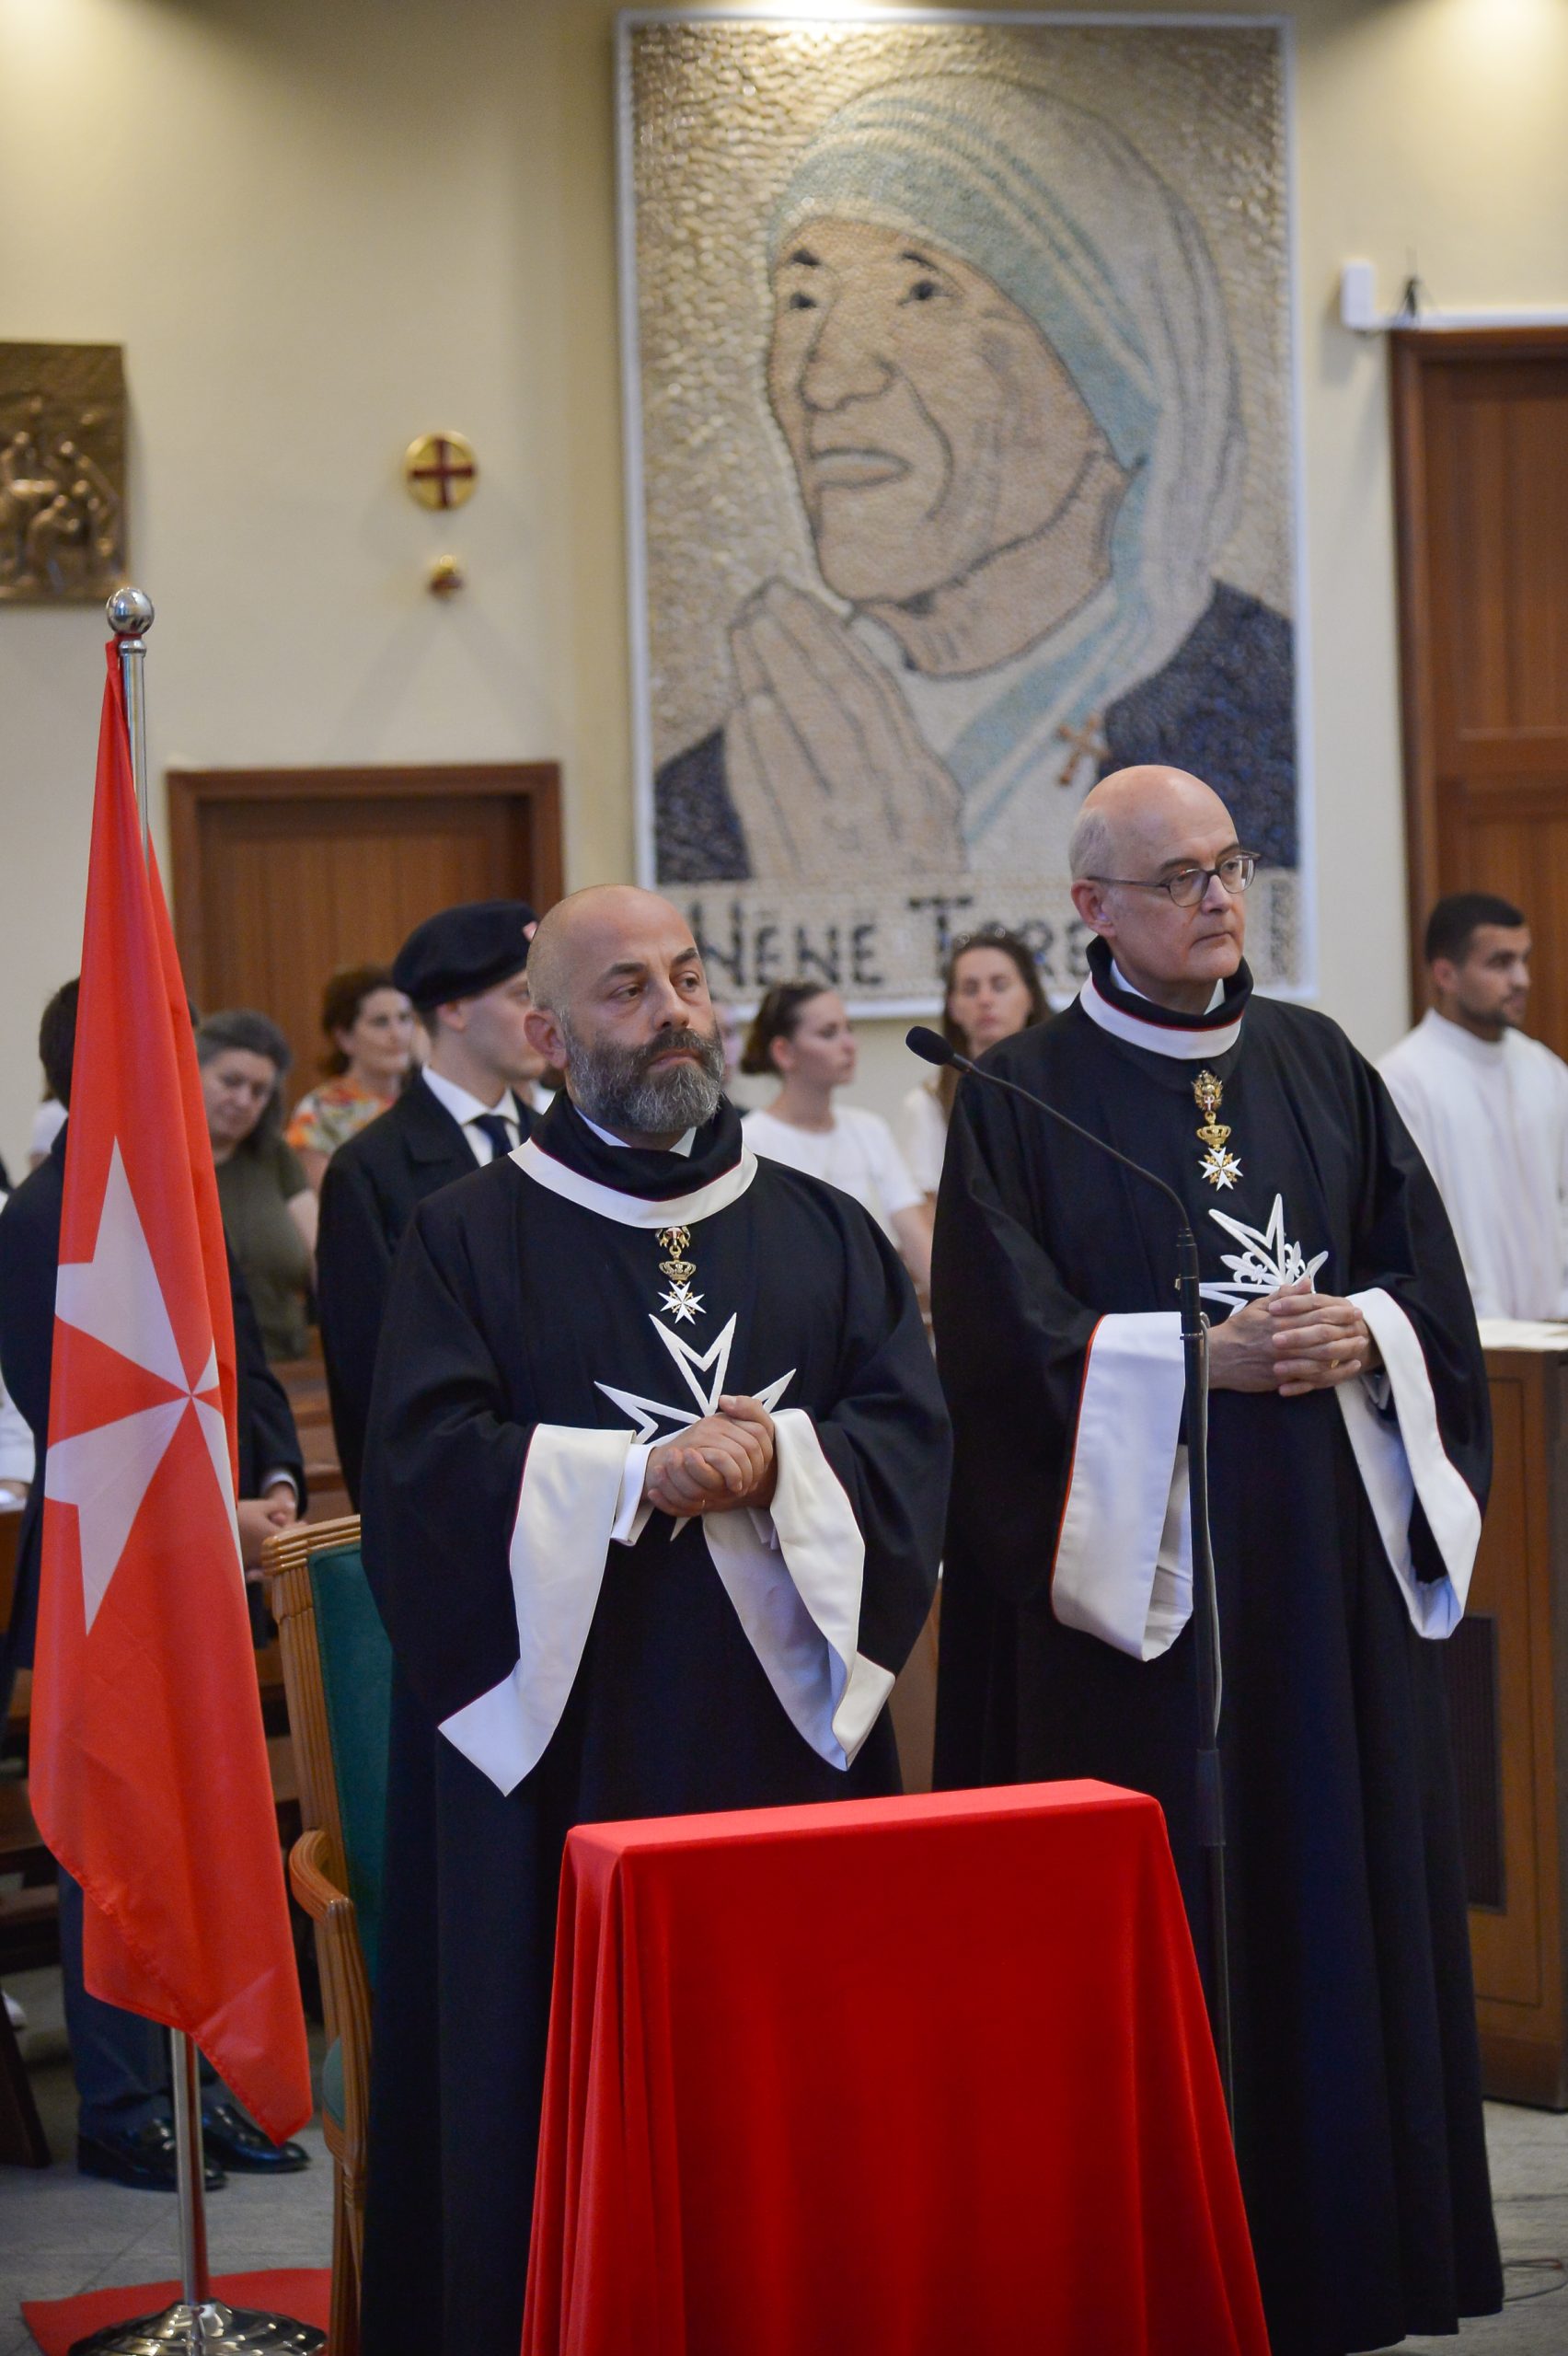 Investiture as Conventual Chaplain Ad Honorem of the Order of Malta of His Excellency Monsignor Arjan Dodaj